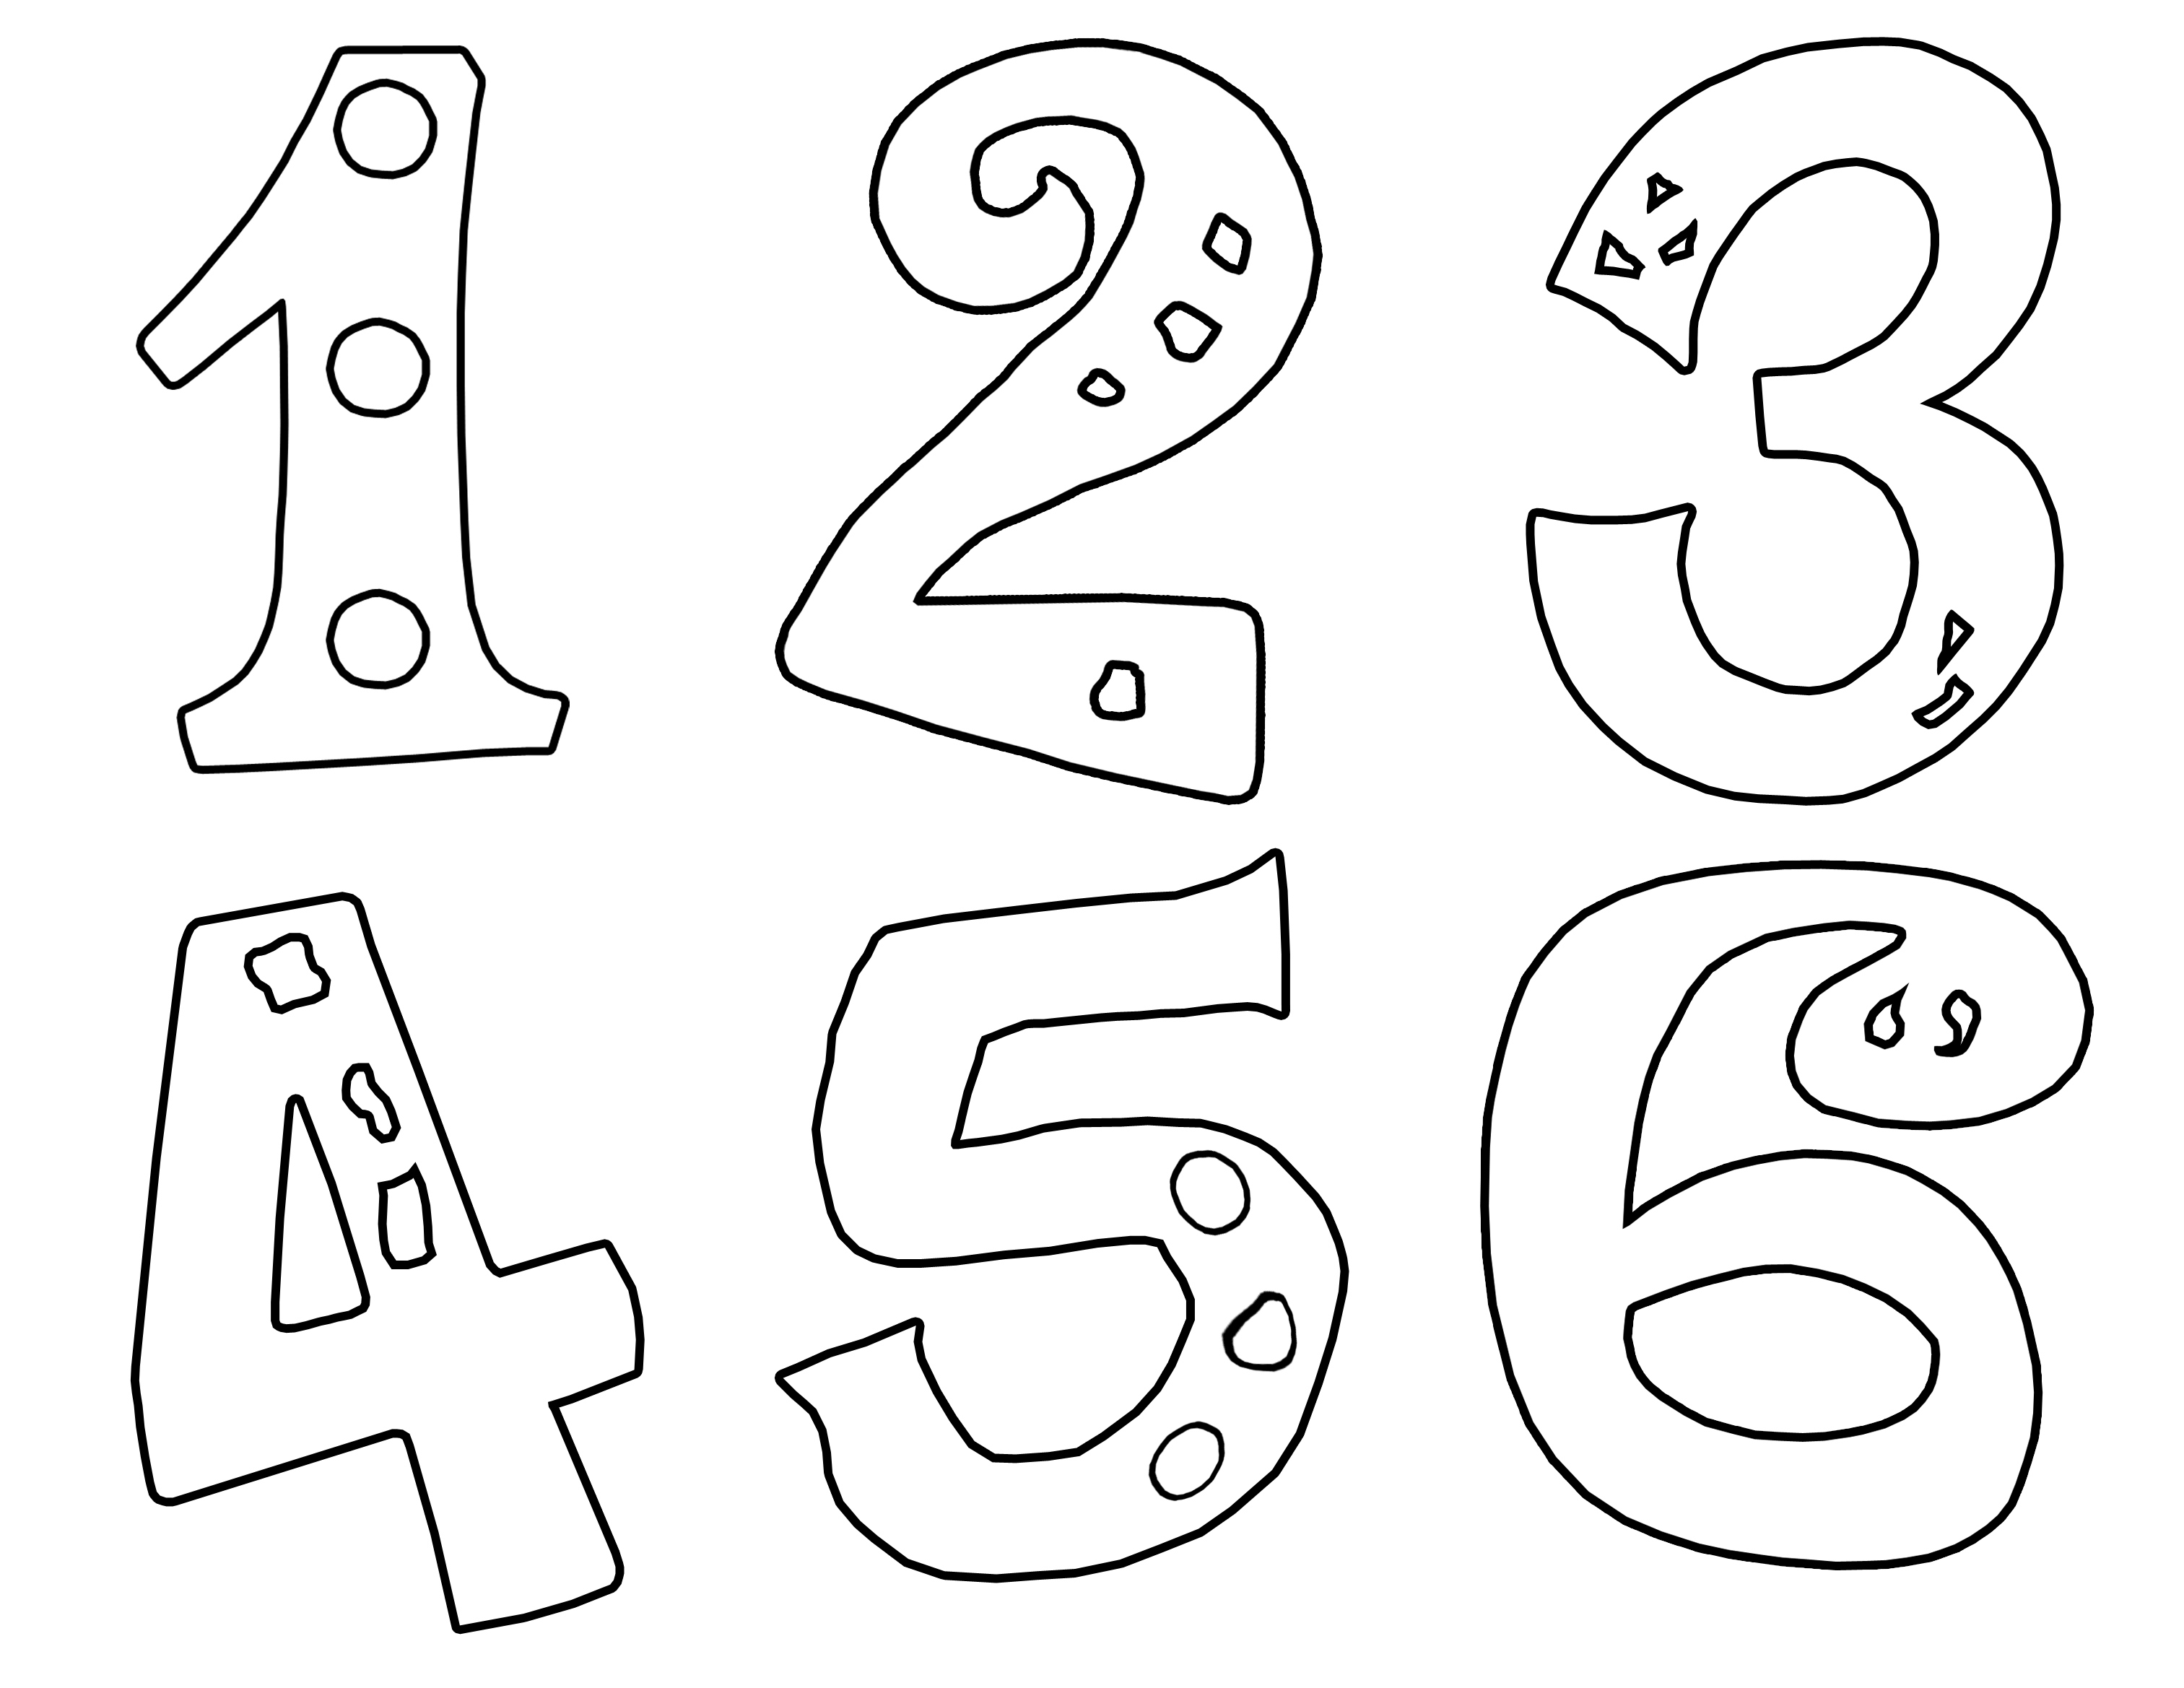 Number Coloring Pages 1 10 at GetColorings.com | Free printable